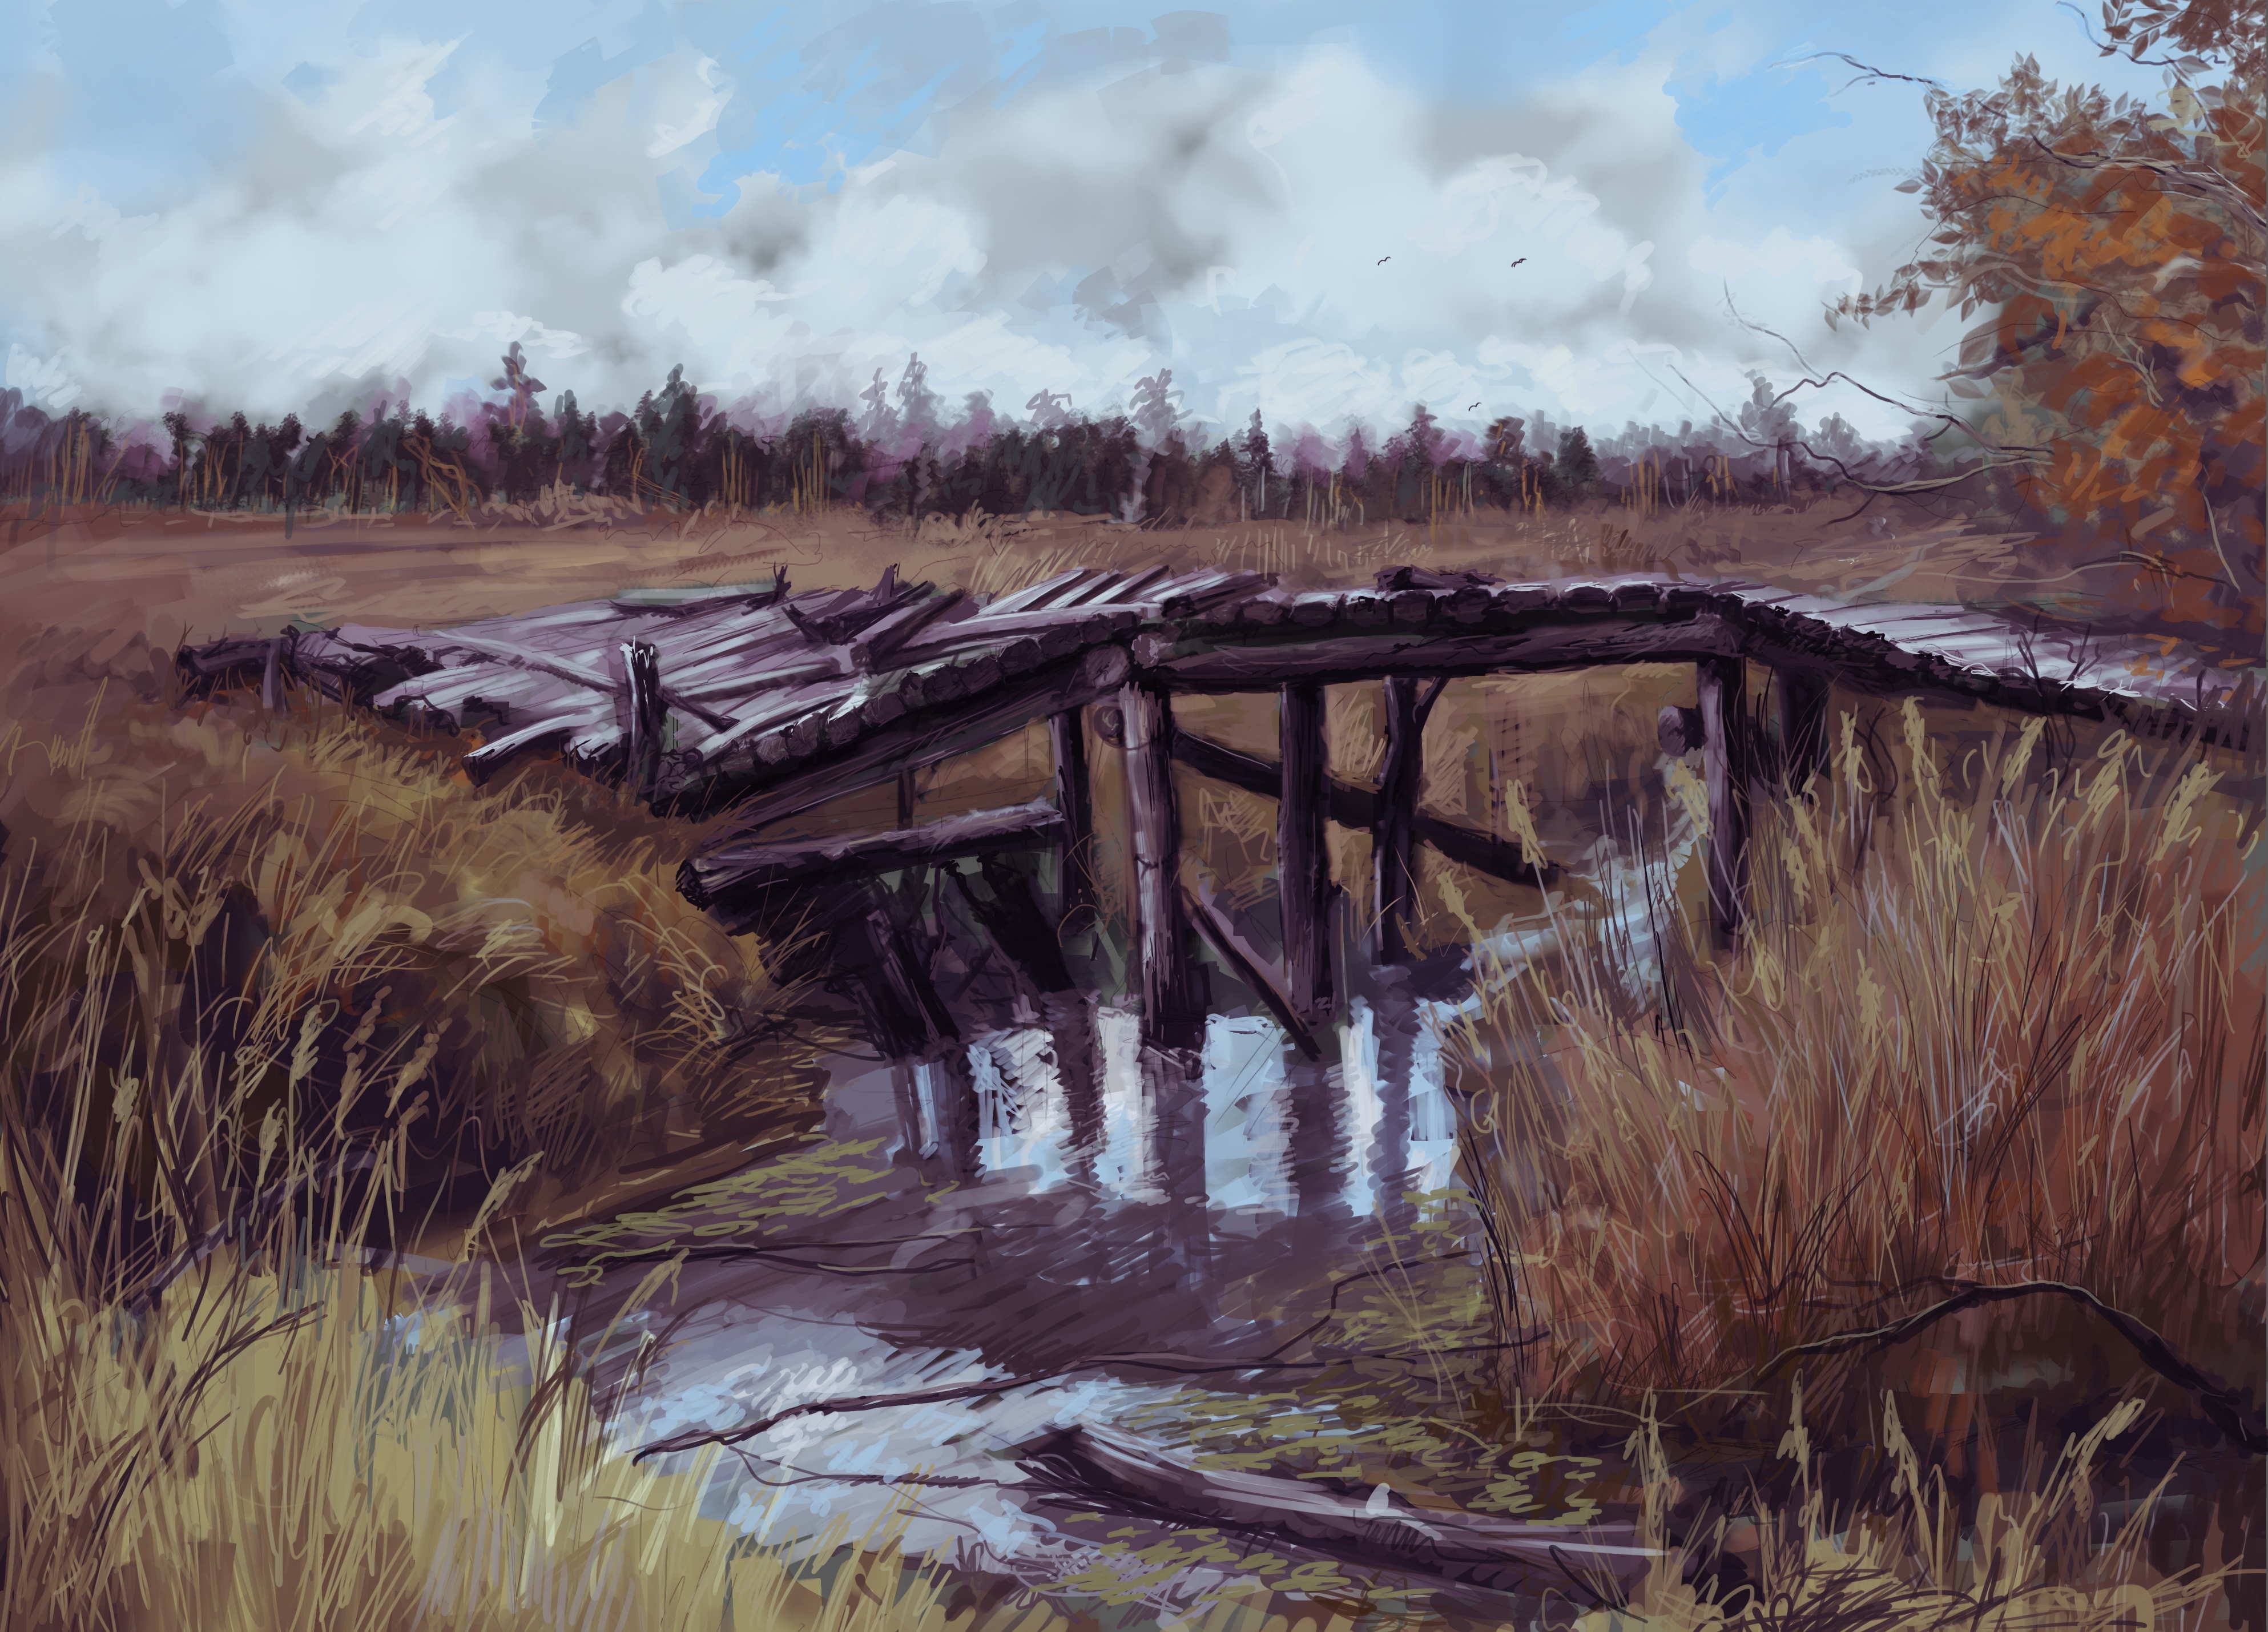 A crumbling wooden bridge over a creek. This must be in the Swamps for sure.